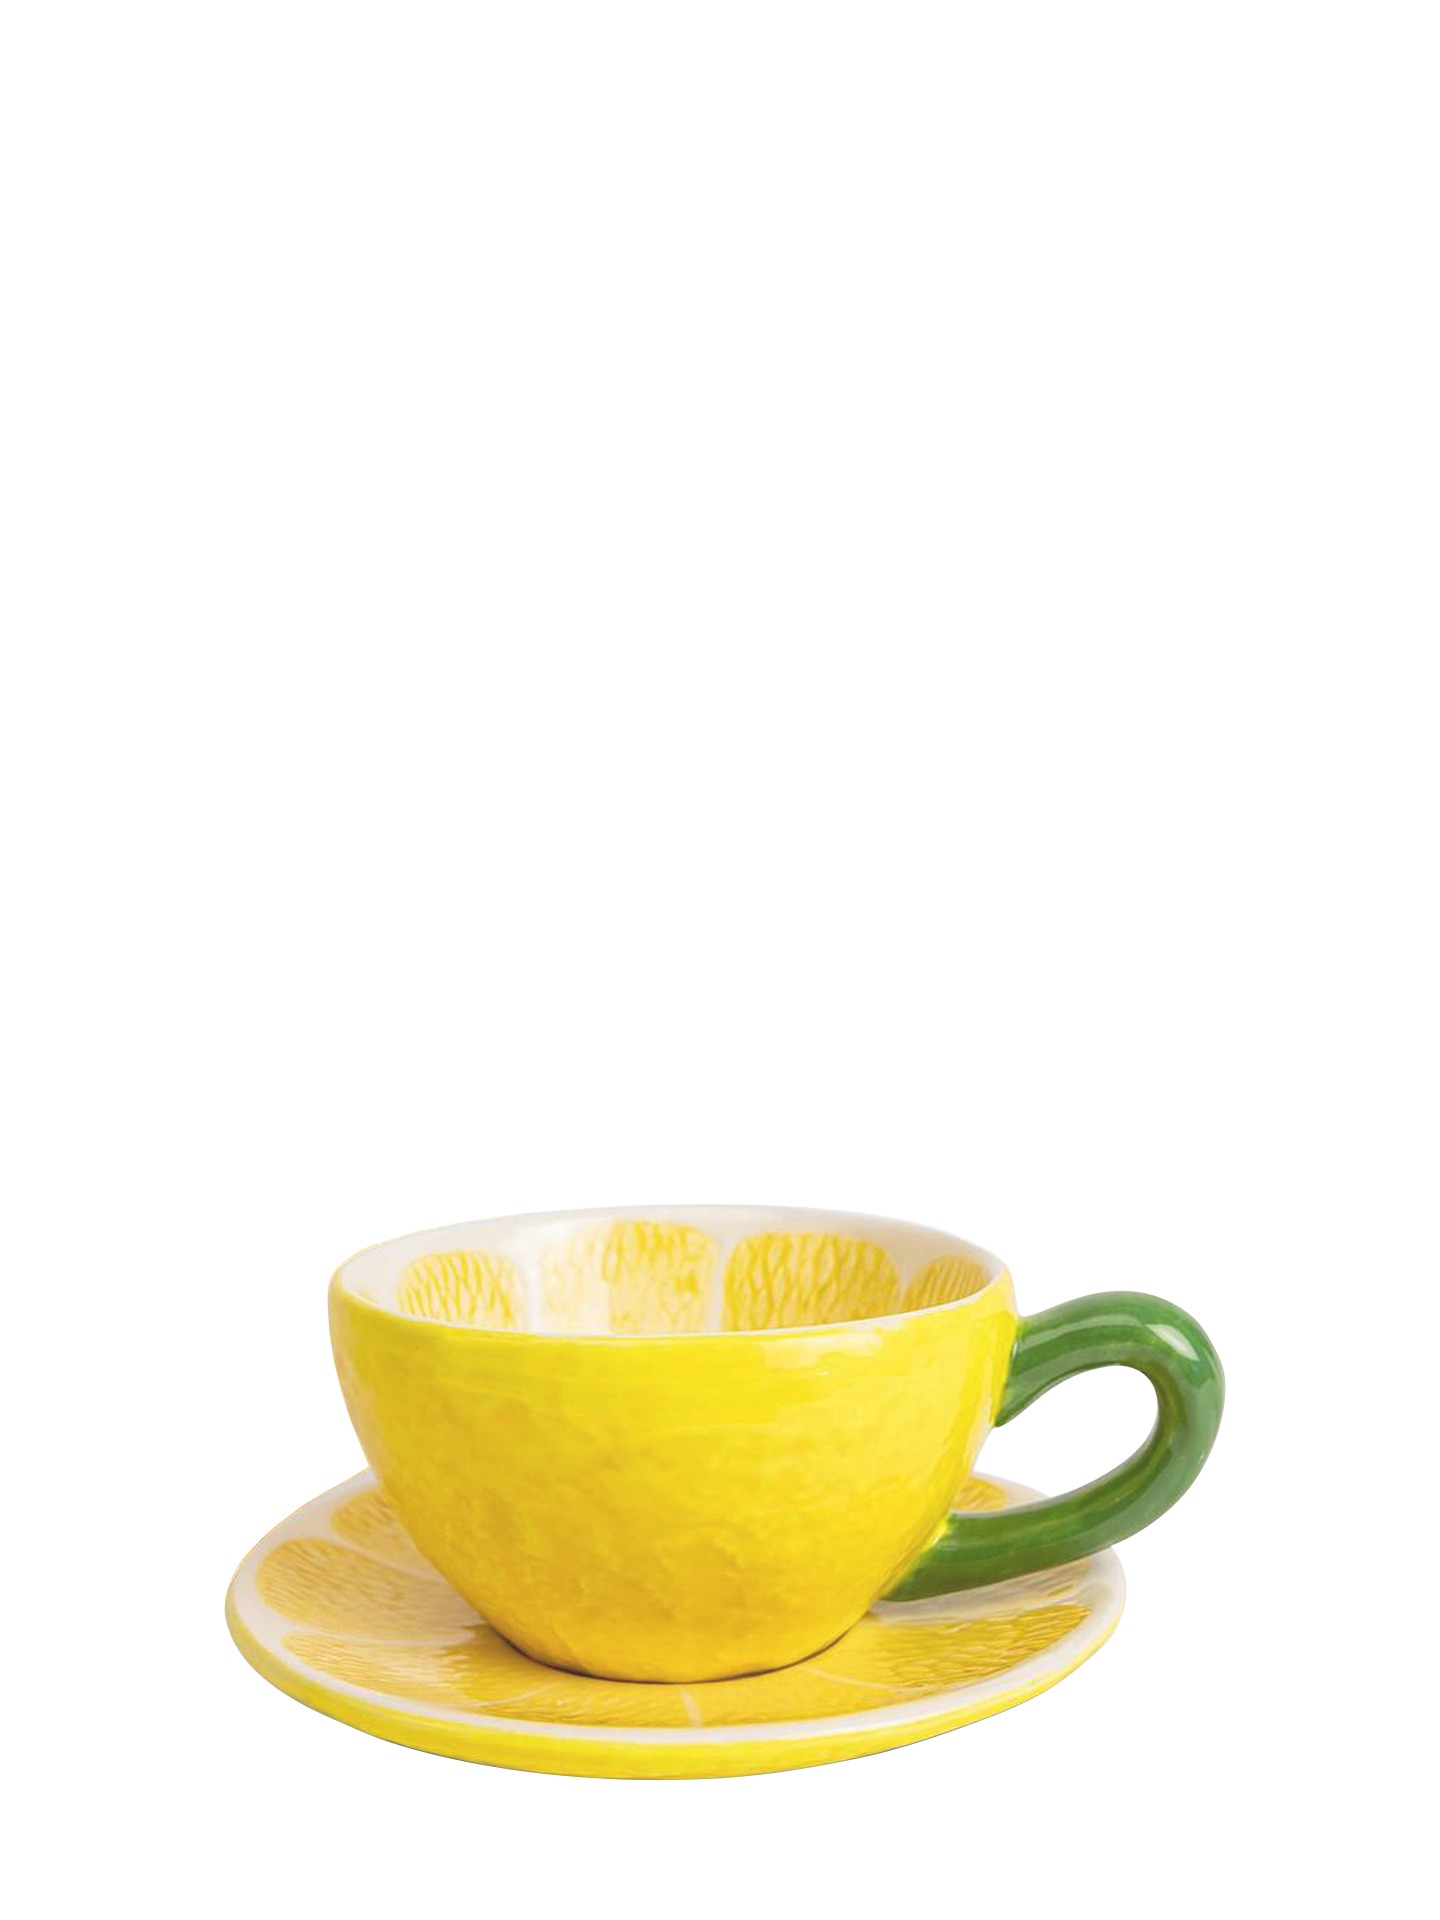 Lemon cup and plate